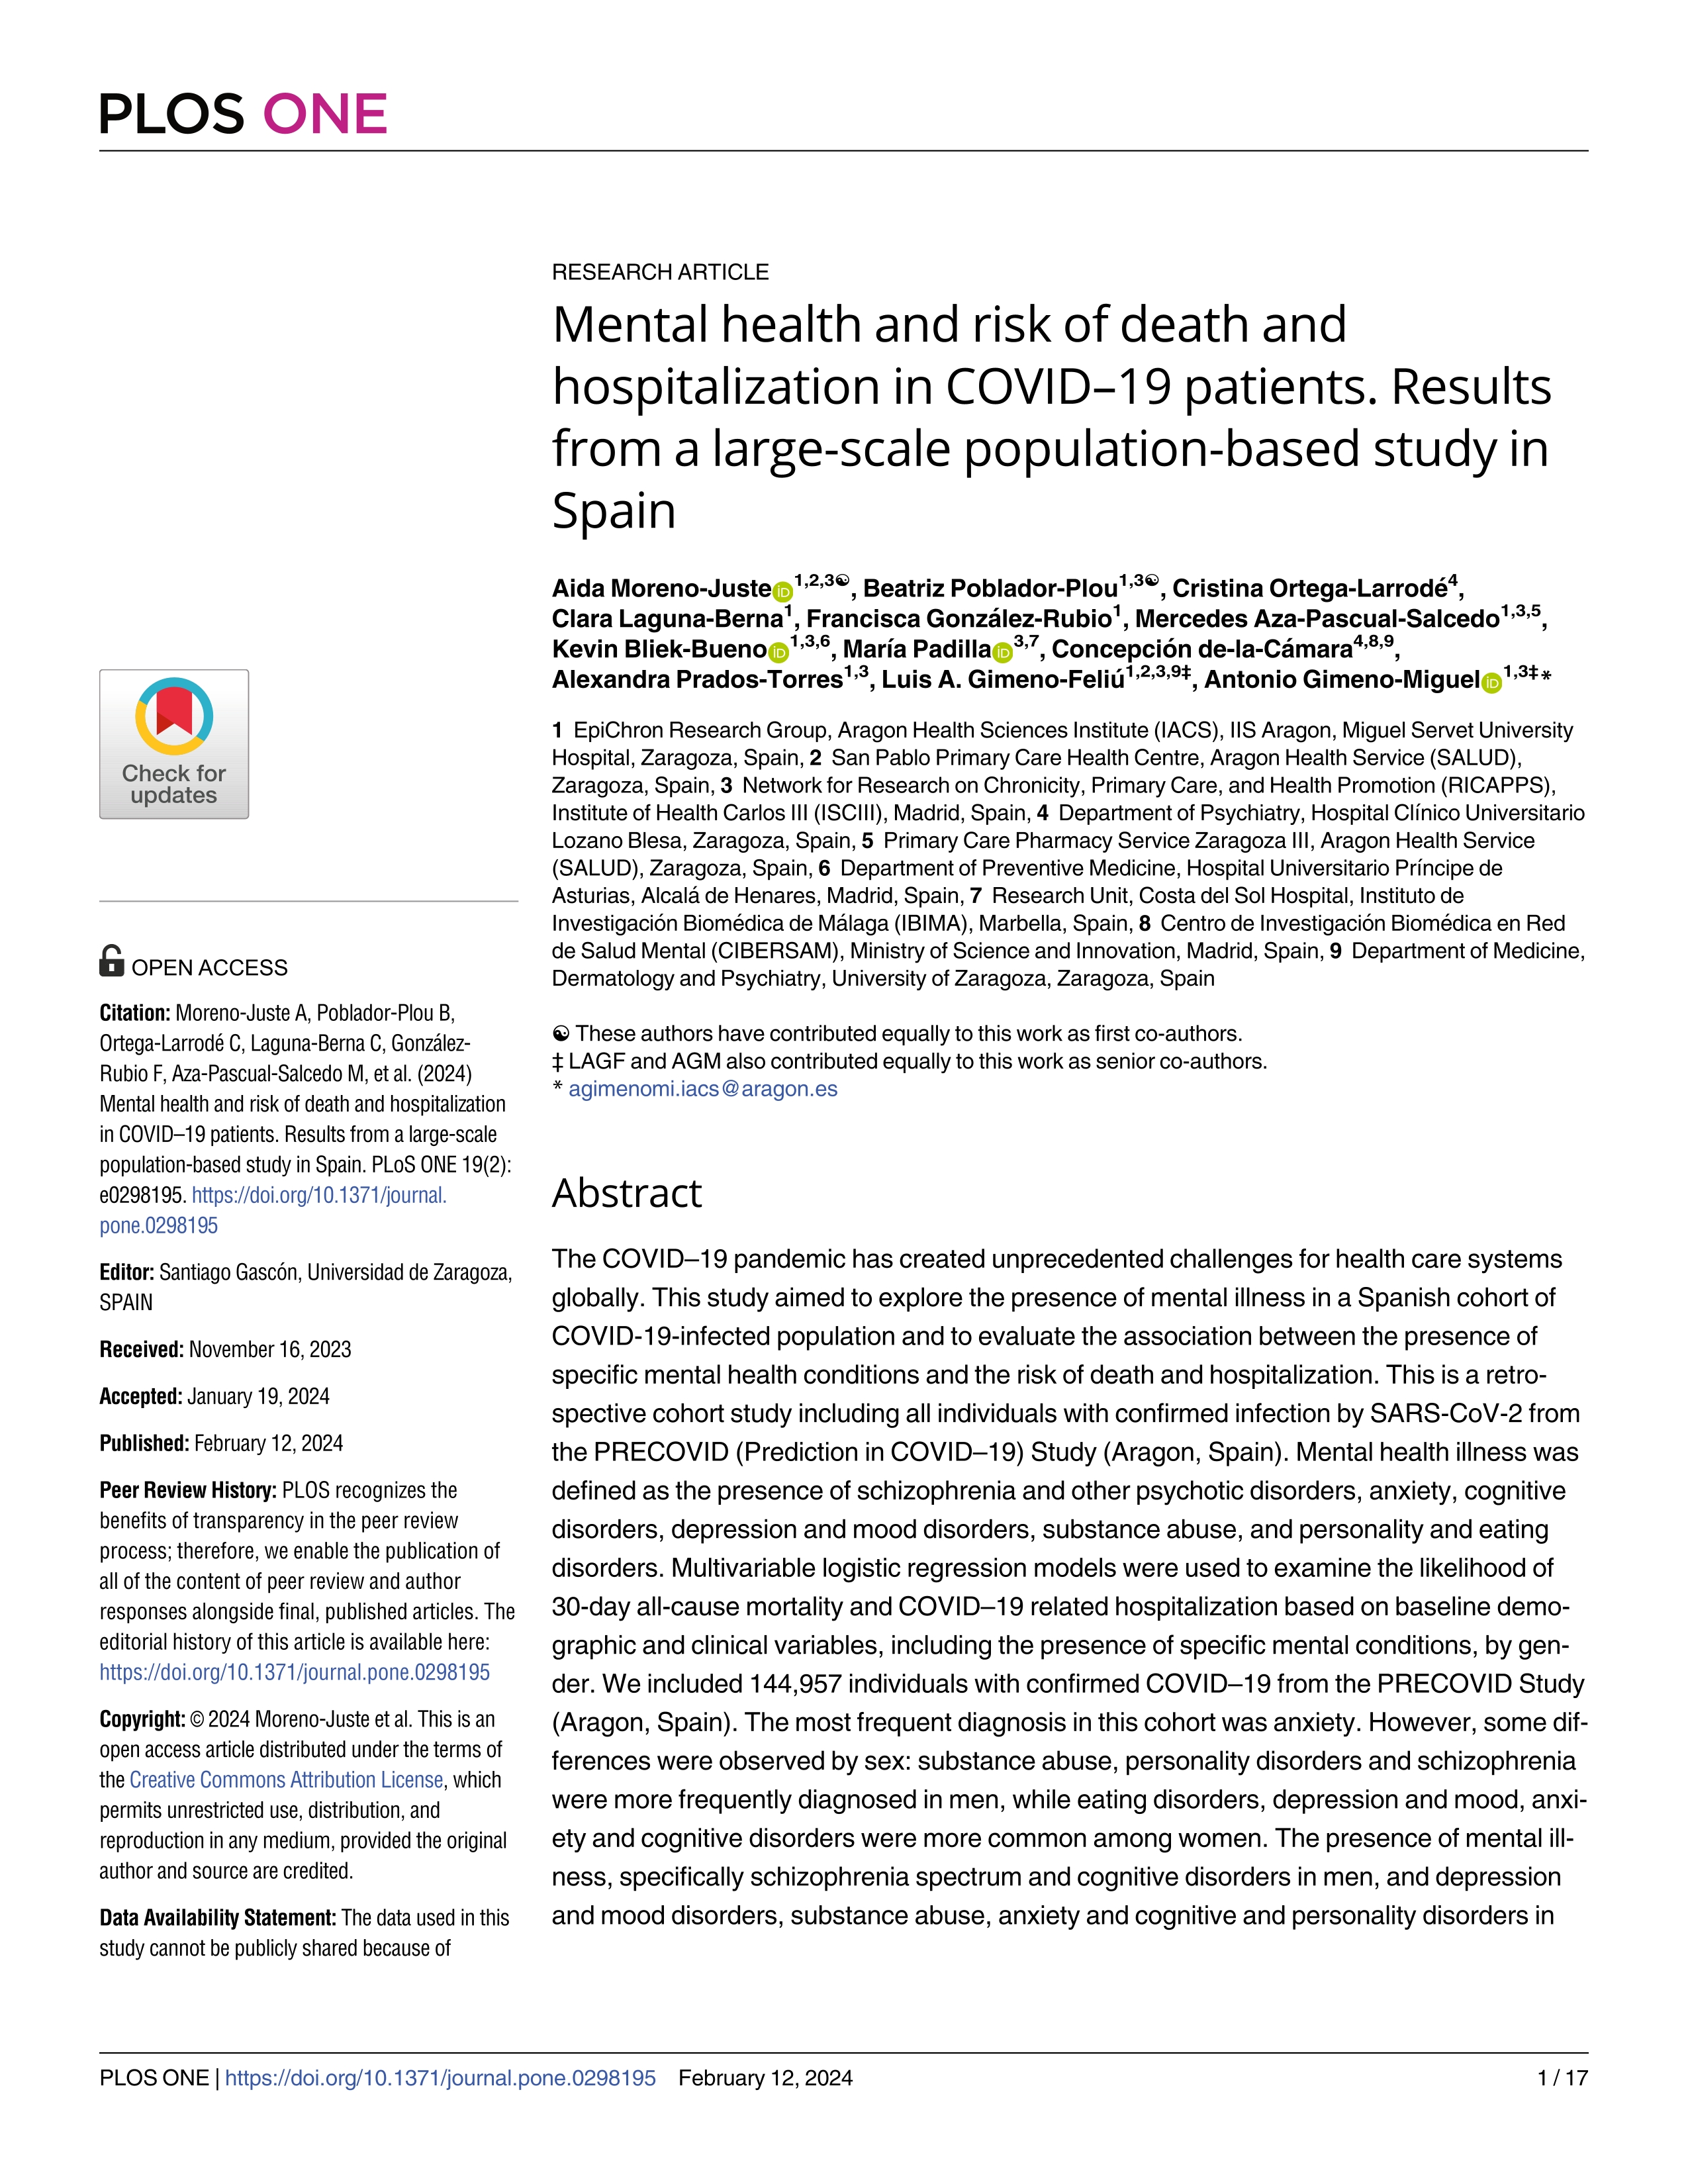 Mental health and risk of death and hospitalization in COVID–19 patients. Results from a large-scale population-based study in Spain